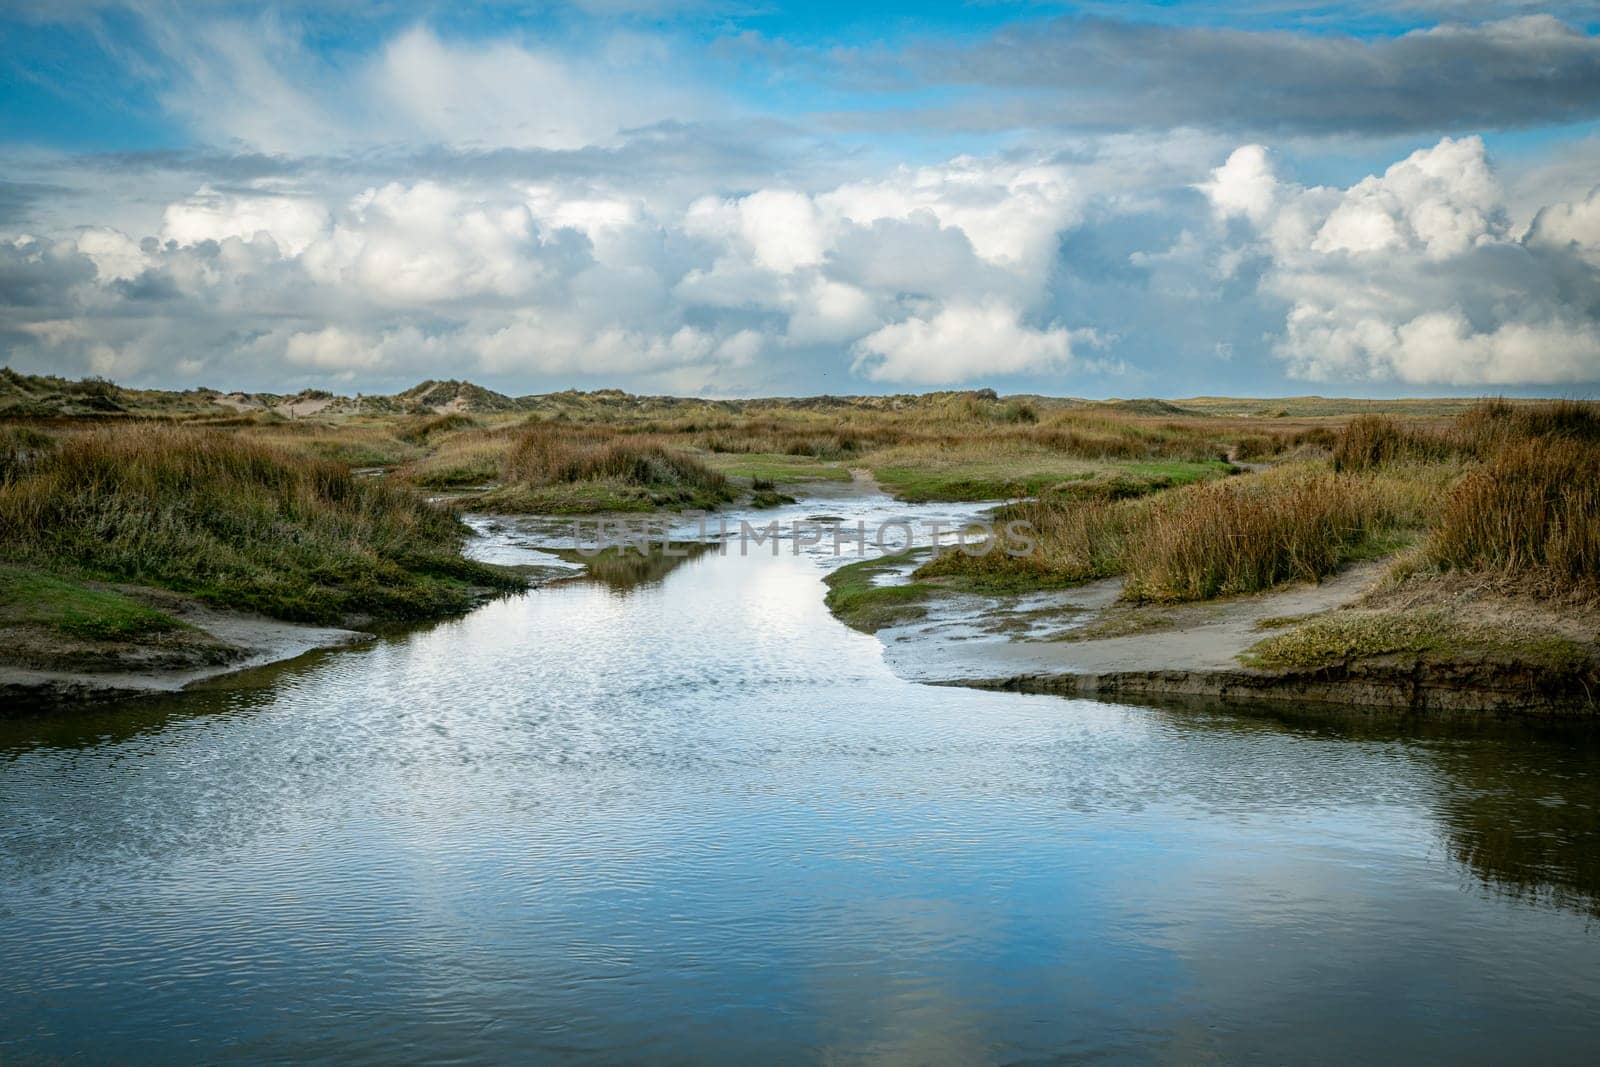 the slufter nature area of the island texel by compuinfoto